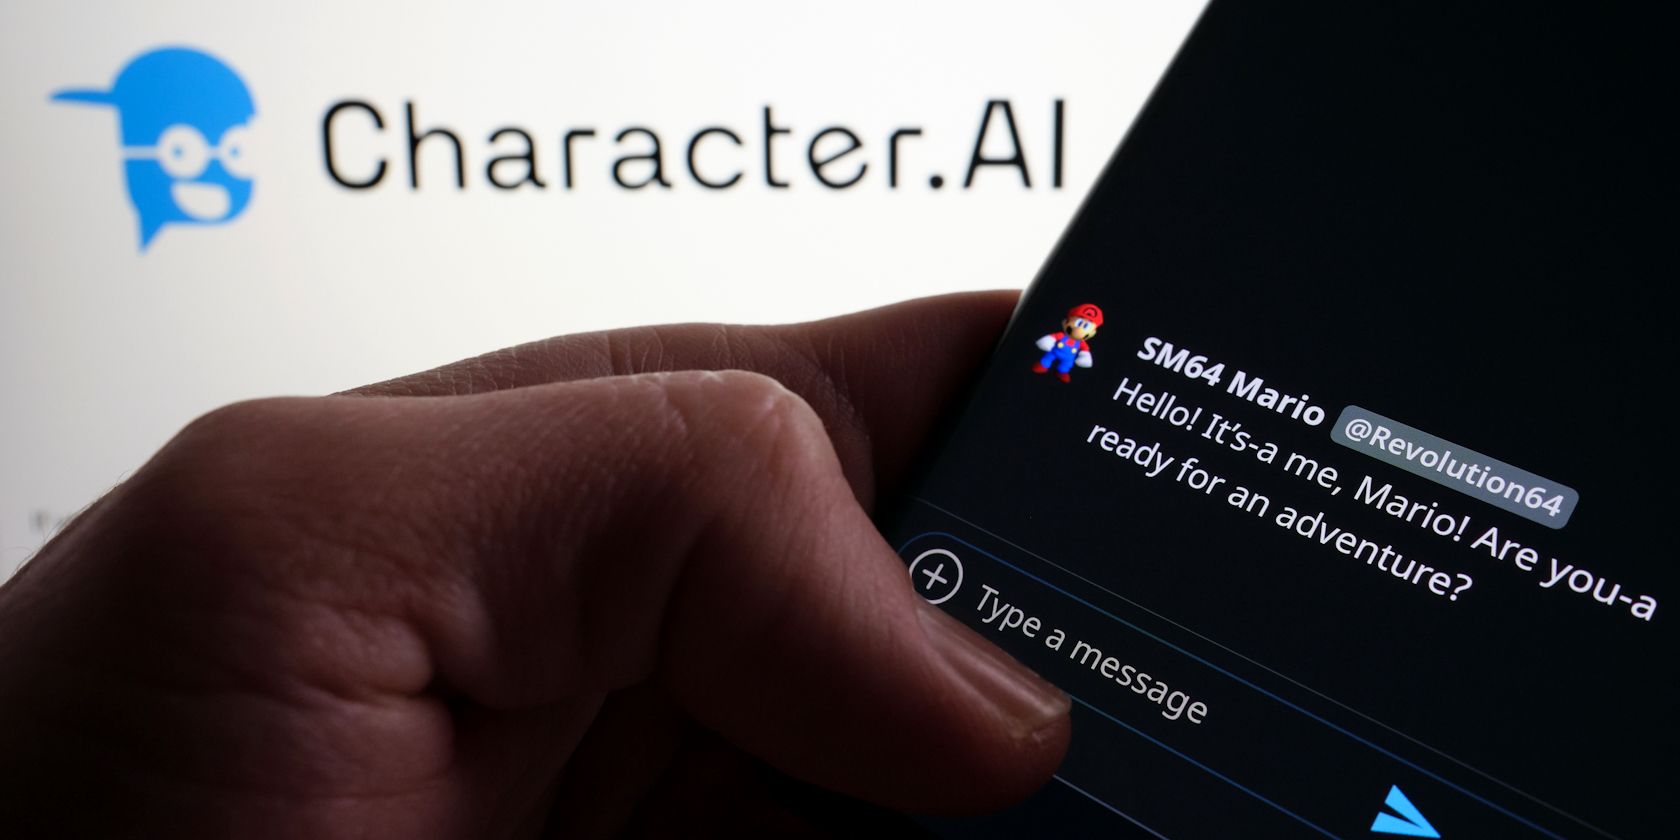 character ai logo with mario chat on smartphone